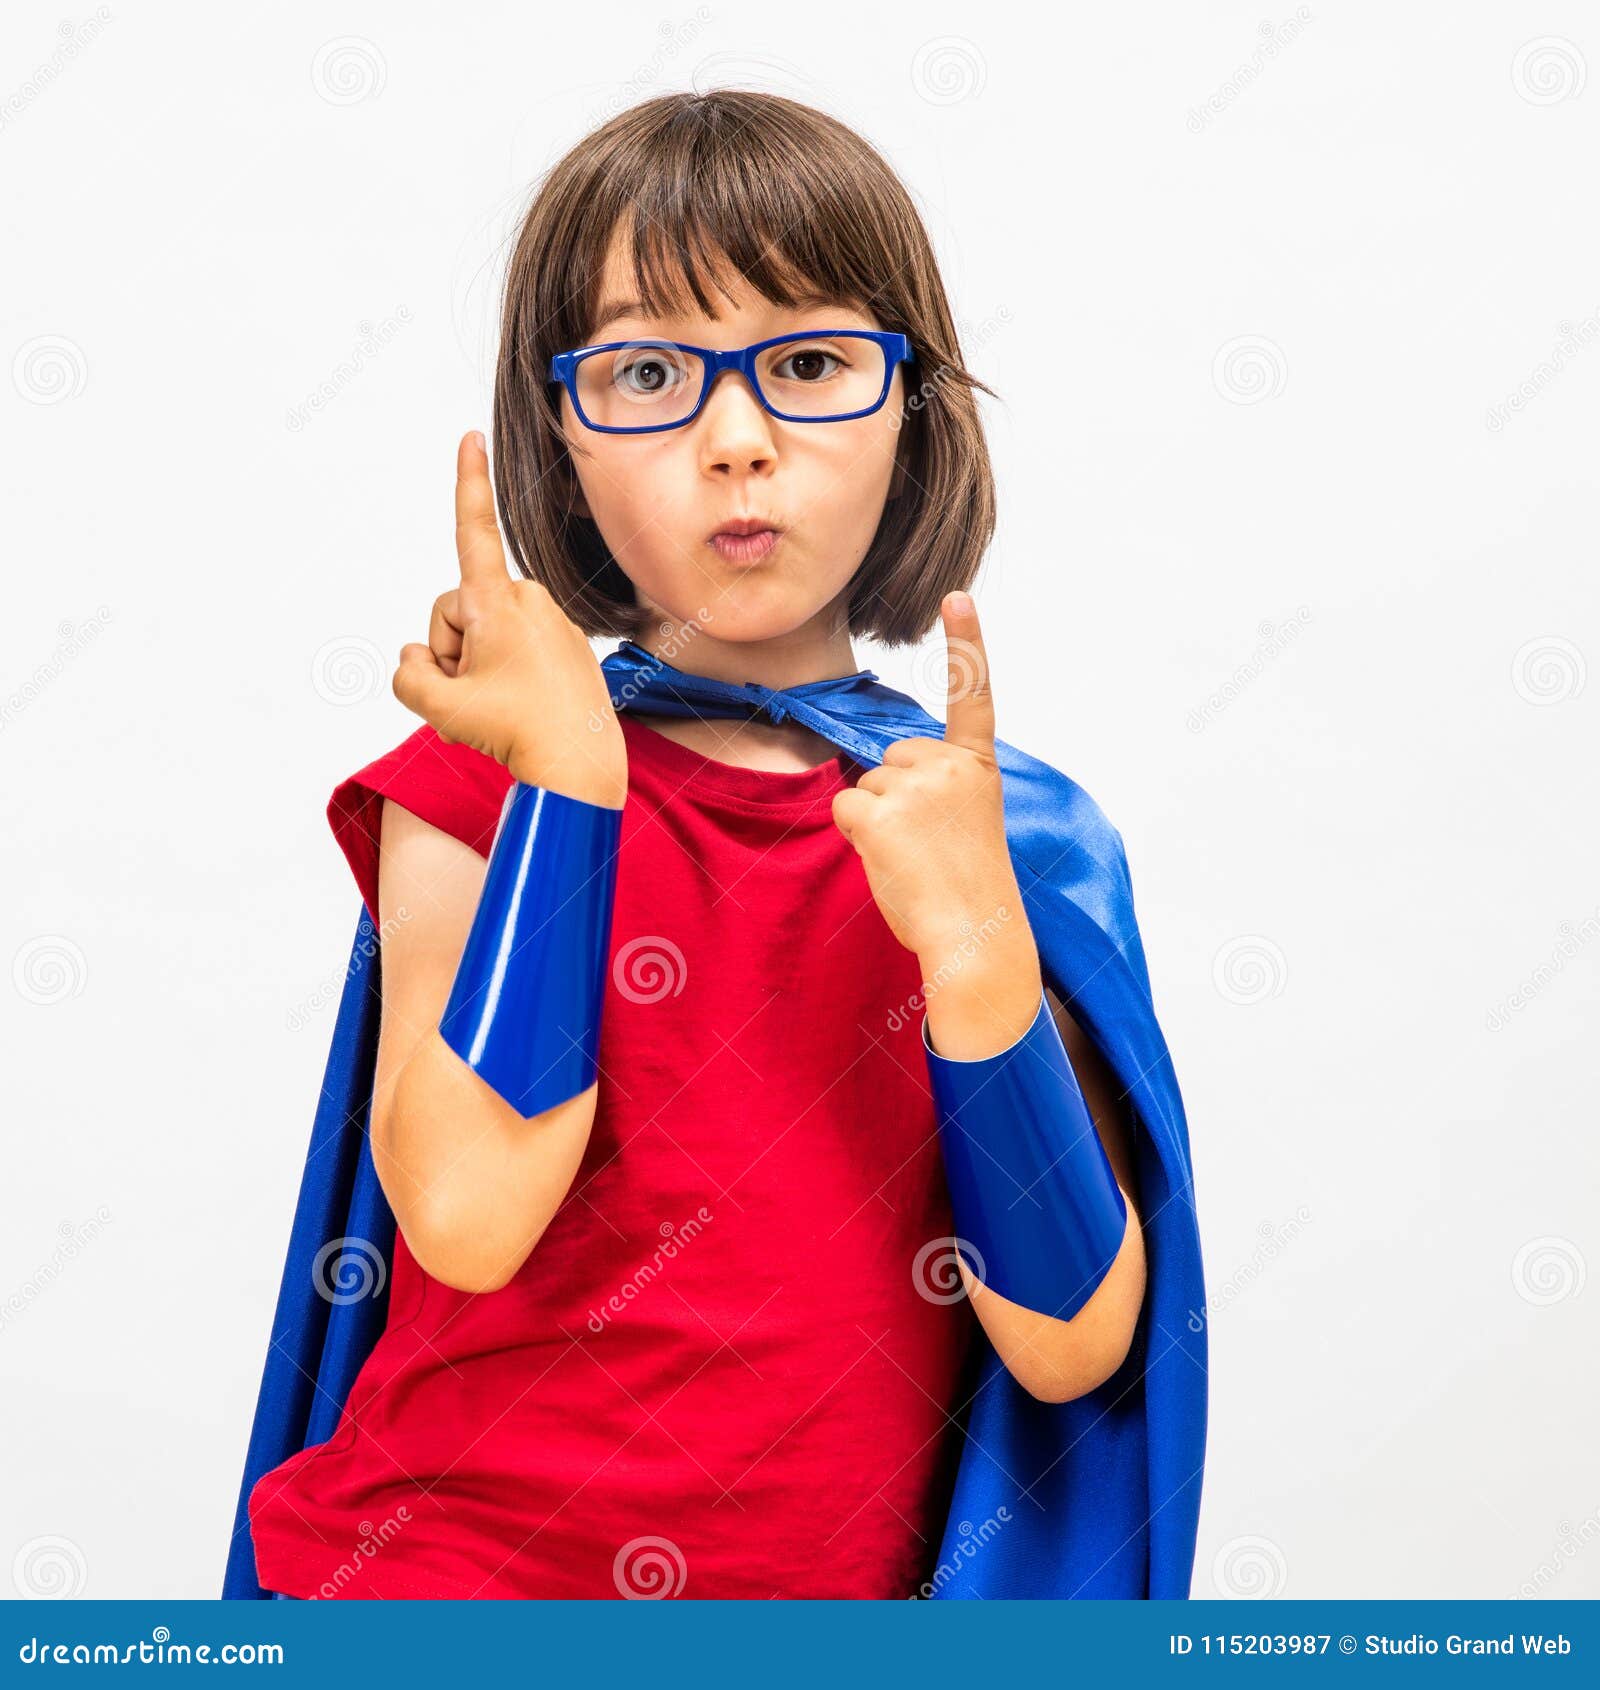 fun superhero child raising her gifted fingers for critical mindset